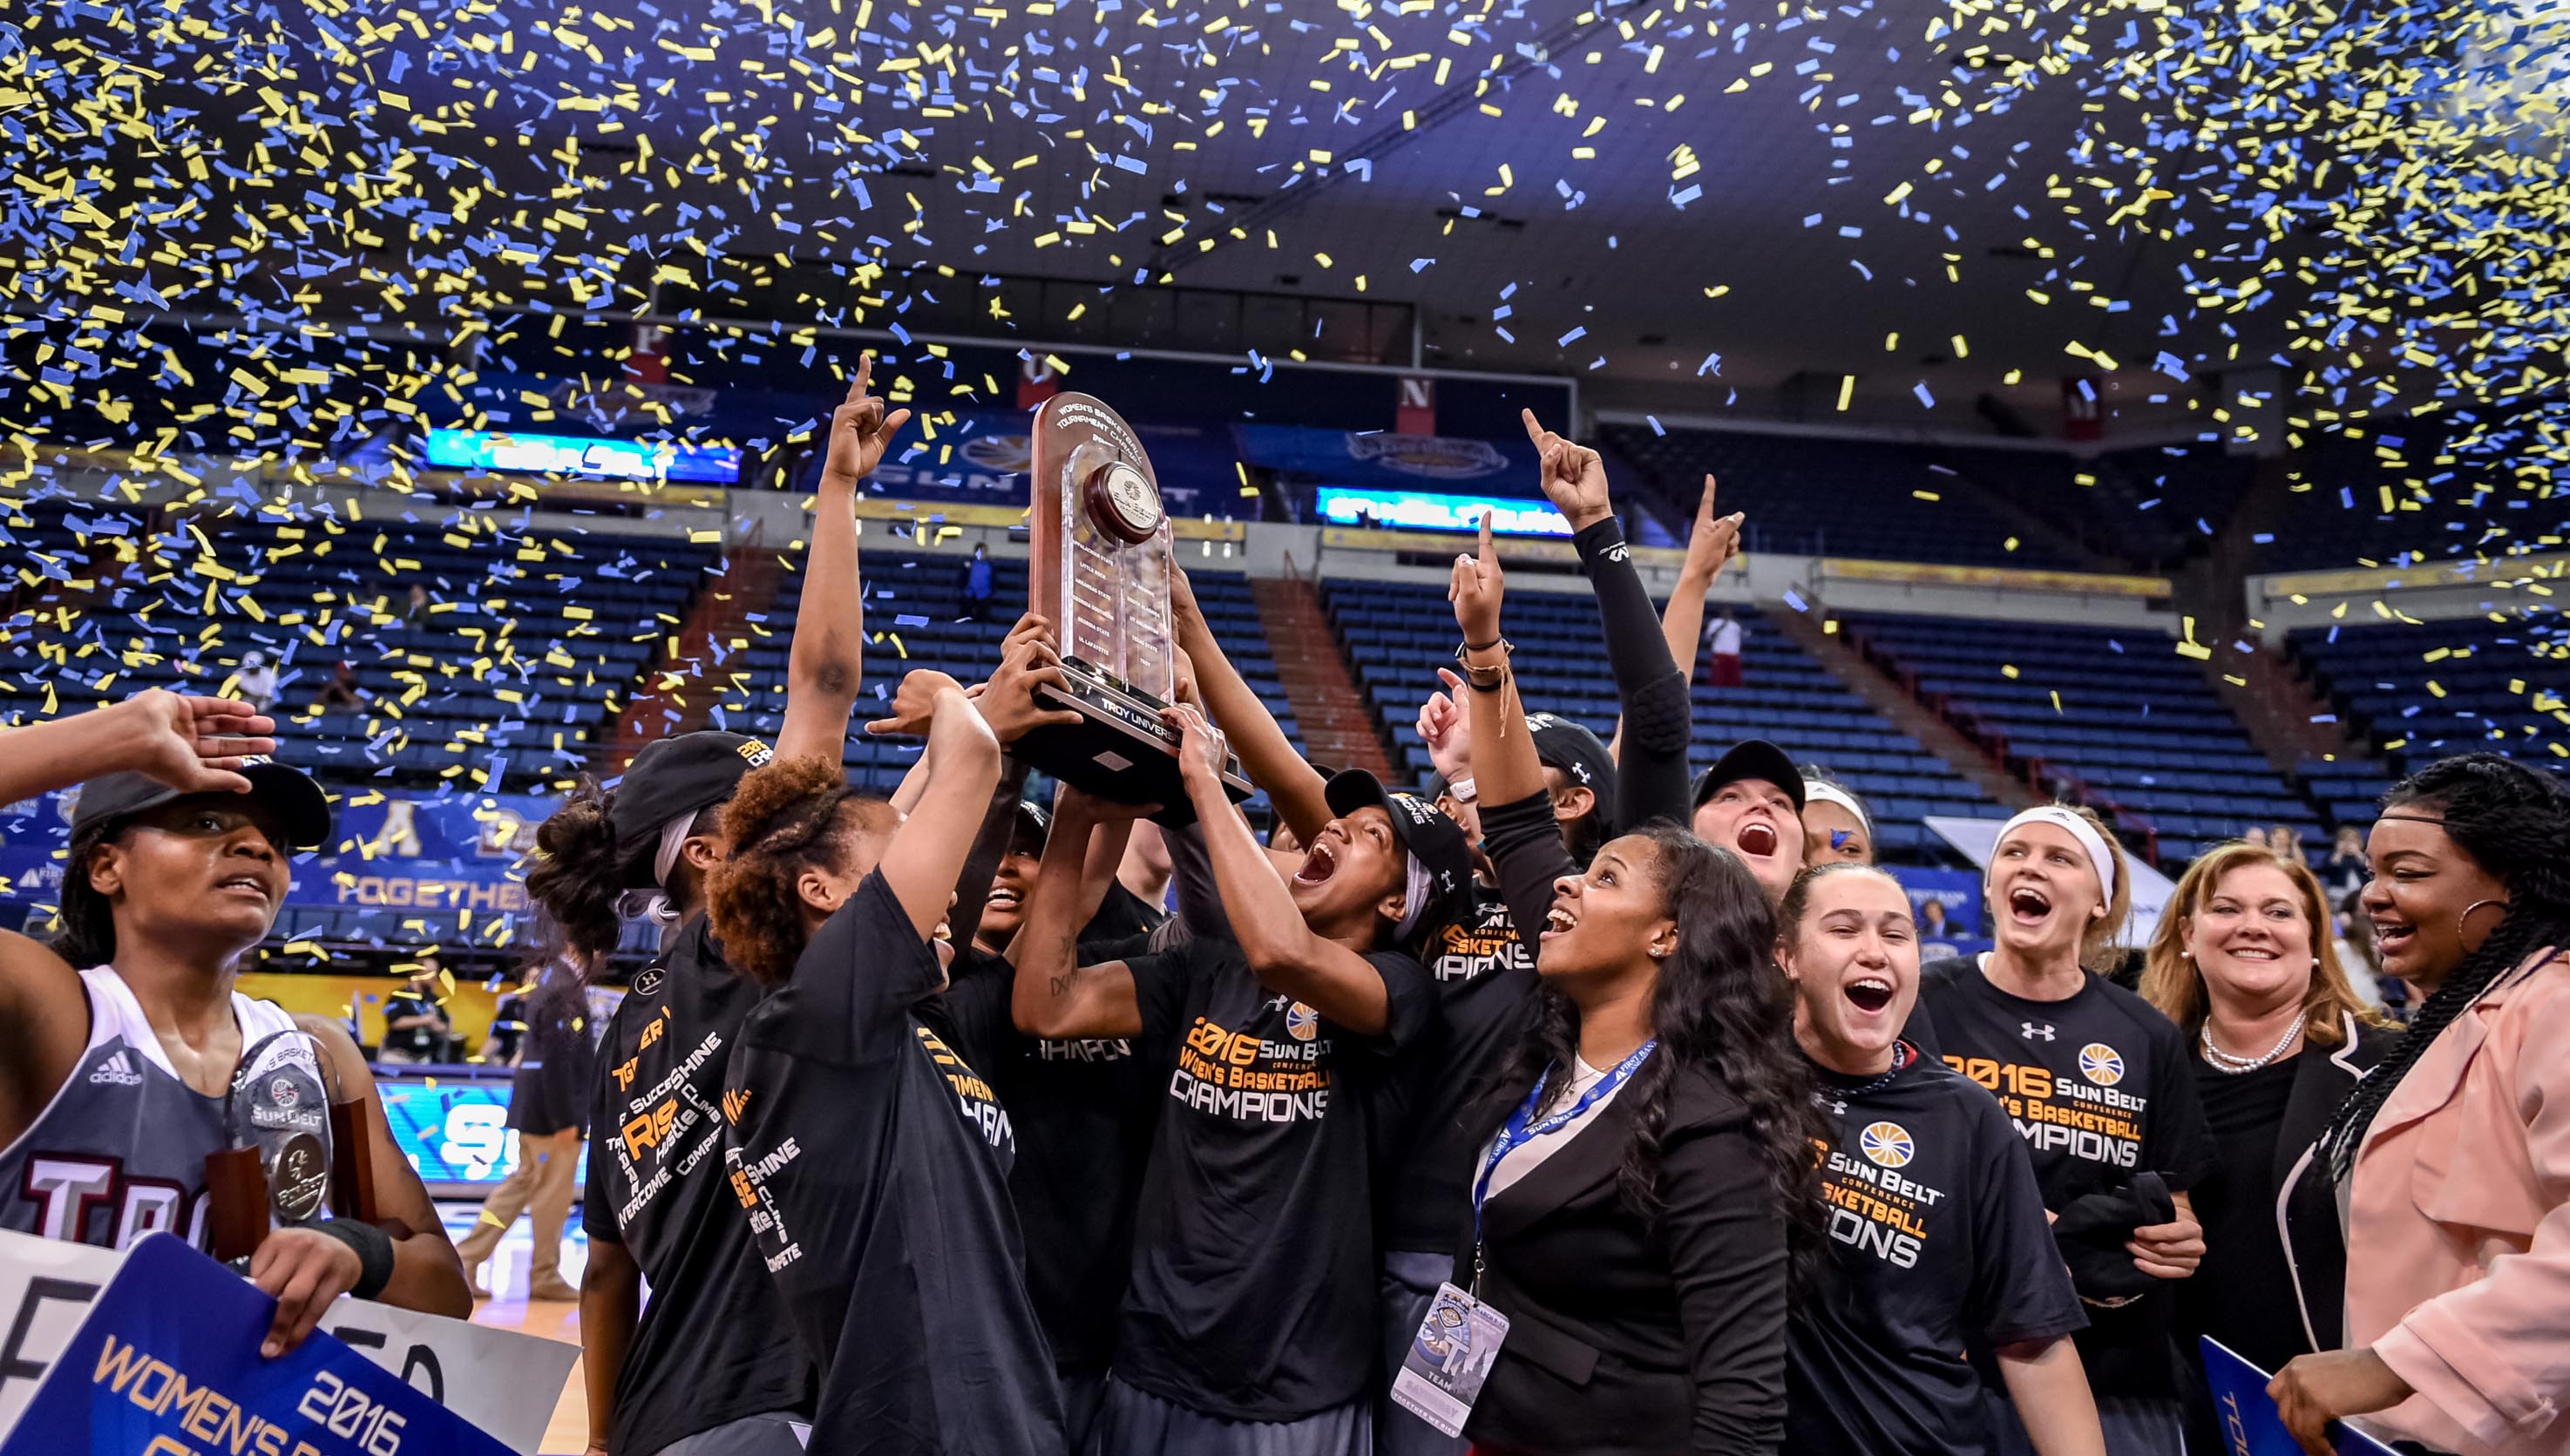 Troy Women Are Going Dancing After First Sun Belt Championship The